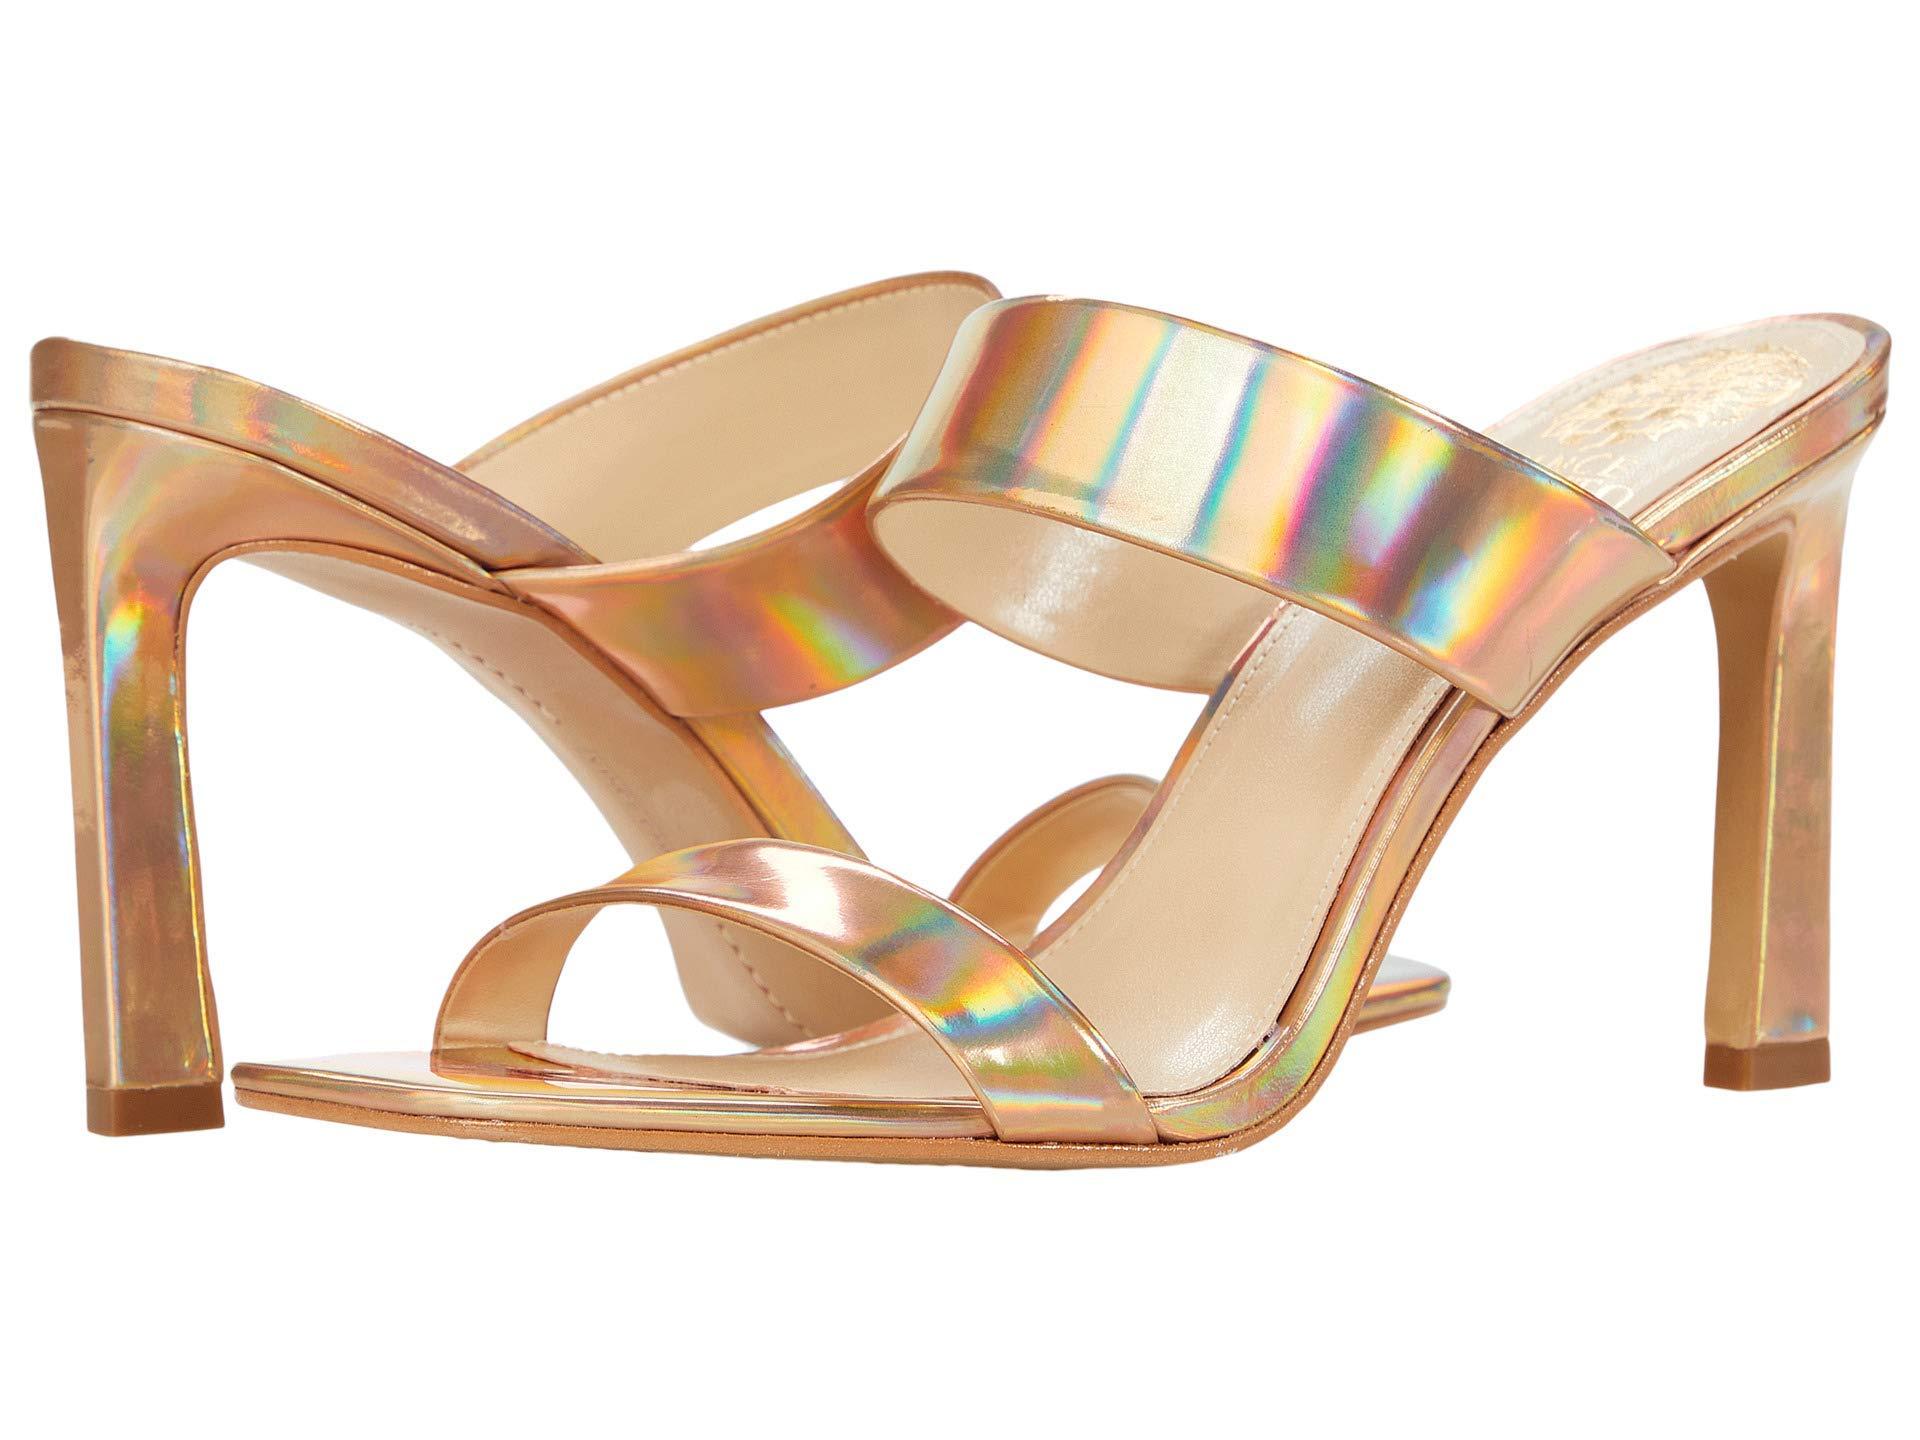 Vince Camuto Leather Brisstol Heeled Sandal in Egyptian Gold (Metallic